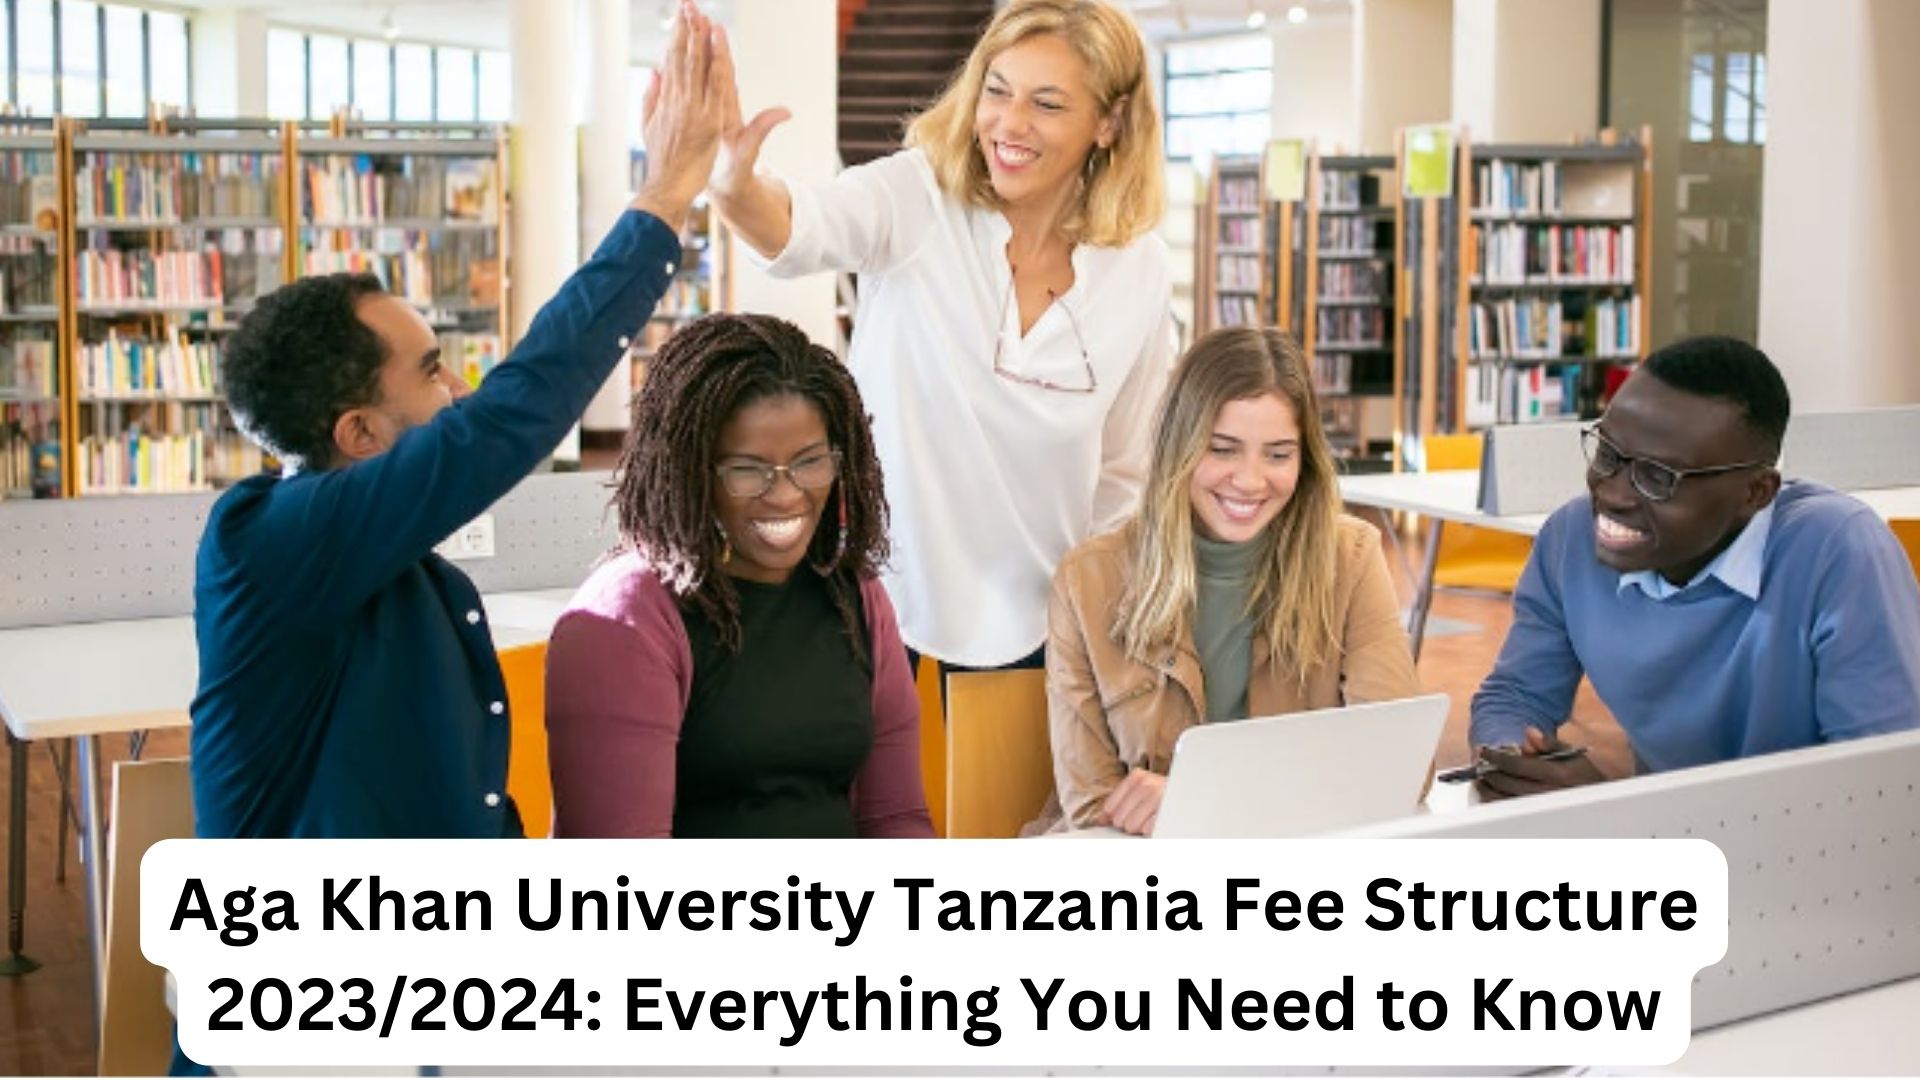 Aga Khan University Tanzania Fee Structure 2023/2024: Everything You Need to Know